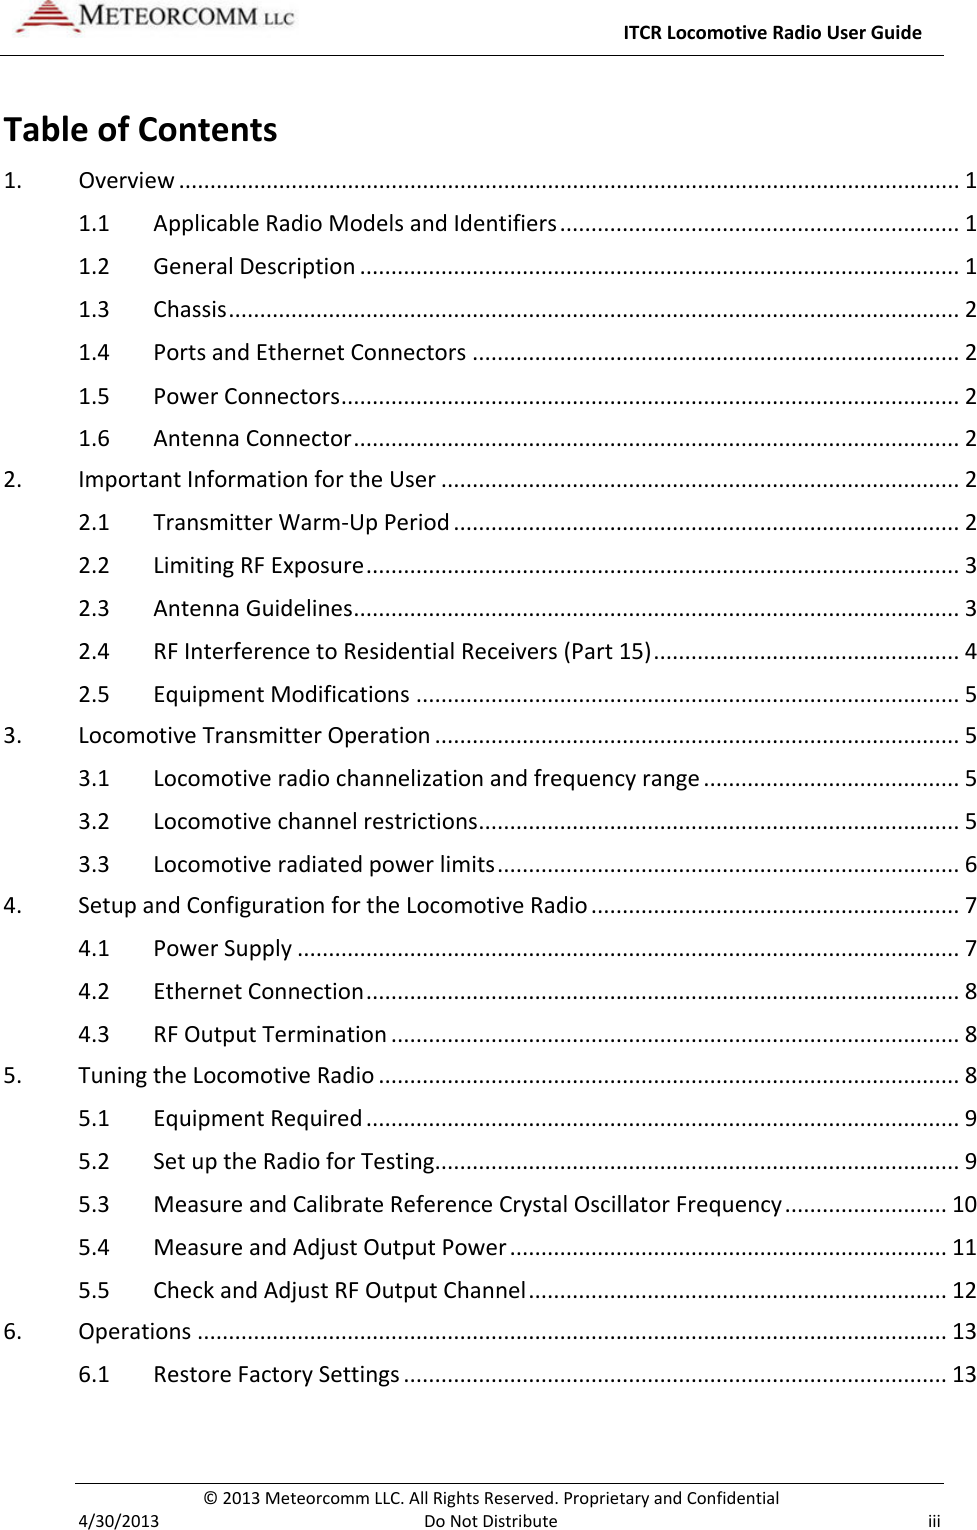     ITCR Locomotive Radio User Guide  © 2013 Meteorcomm LLC. All Rights Reserved. Proprietary and Confidential   4/30/2013  Do Not Distribute iii Table of Contents 1. Overview ............................................................................................................................. 1 1.1 Applicable Radio Models and Identifiers ................................................................ 1 1.2 General Description ................................................................................................ 1 1.3 Chassis ..................................................................................................................... 2 1.4 Ports and Ethernet Connectors .............................................................................. 2 1.5 Power Connectors ................................................................................................... 2 1.6 Antenna Connector ................................................................................................. 2 2. Important Information for the User ................................................................................... 2 2.1 Transmitter Warm-Up Period ................................................................................. 2 2.2 Limiting RF Exposure ............................................................................................... 3 2.3 Antenna Guidelines ................................................................................................. 3 2.4 RF Interference to Residential Receivers (Part 15) ................................................. 4 2.5 Equipment Modifications ....................................................................................... 5 3. Locomotive Transmitter Operation .................................................................................... 5 3.1 Locomotive radio channelization and frequency range ......................................... 5 3.2 Locomotive channel restrictions ............................................................................. 5 3.3 Locomotive radiated power limits .......................................................................... 6 4. Setup and Configuration for the Locomotive Radio ........................................................... 7 4.1 Power Supply .......................................................................................................... 7 4.2 Ethernet Connection ............................................................................................... 8 4.3 RF Output Termination ........................................................................................... 8 5. Tuning the Locomotive Radio ............................................................................................. 8 5.1 Equipment Required ............................................................................................... 9 5.2 Set up the Radio for Testing.................................................................................... 9 5.3 Measure and Calibrate Reference Crystal Oscillator Frequency .......................... 10 5.4 Measure and Adjust Output Power ...................................................................... 11 5.5 Check and Adjust RF Output Channel ................................................................... 12 6. Operations ........................................................................................................................ 13 6.1 Restore Factory Settings ....................................................................................... 13 